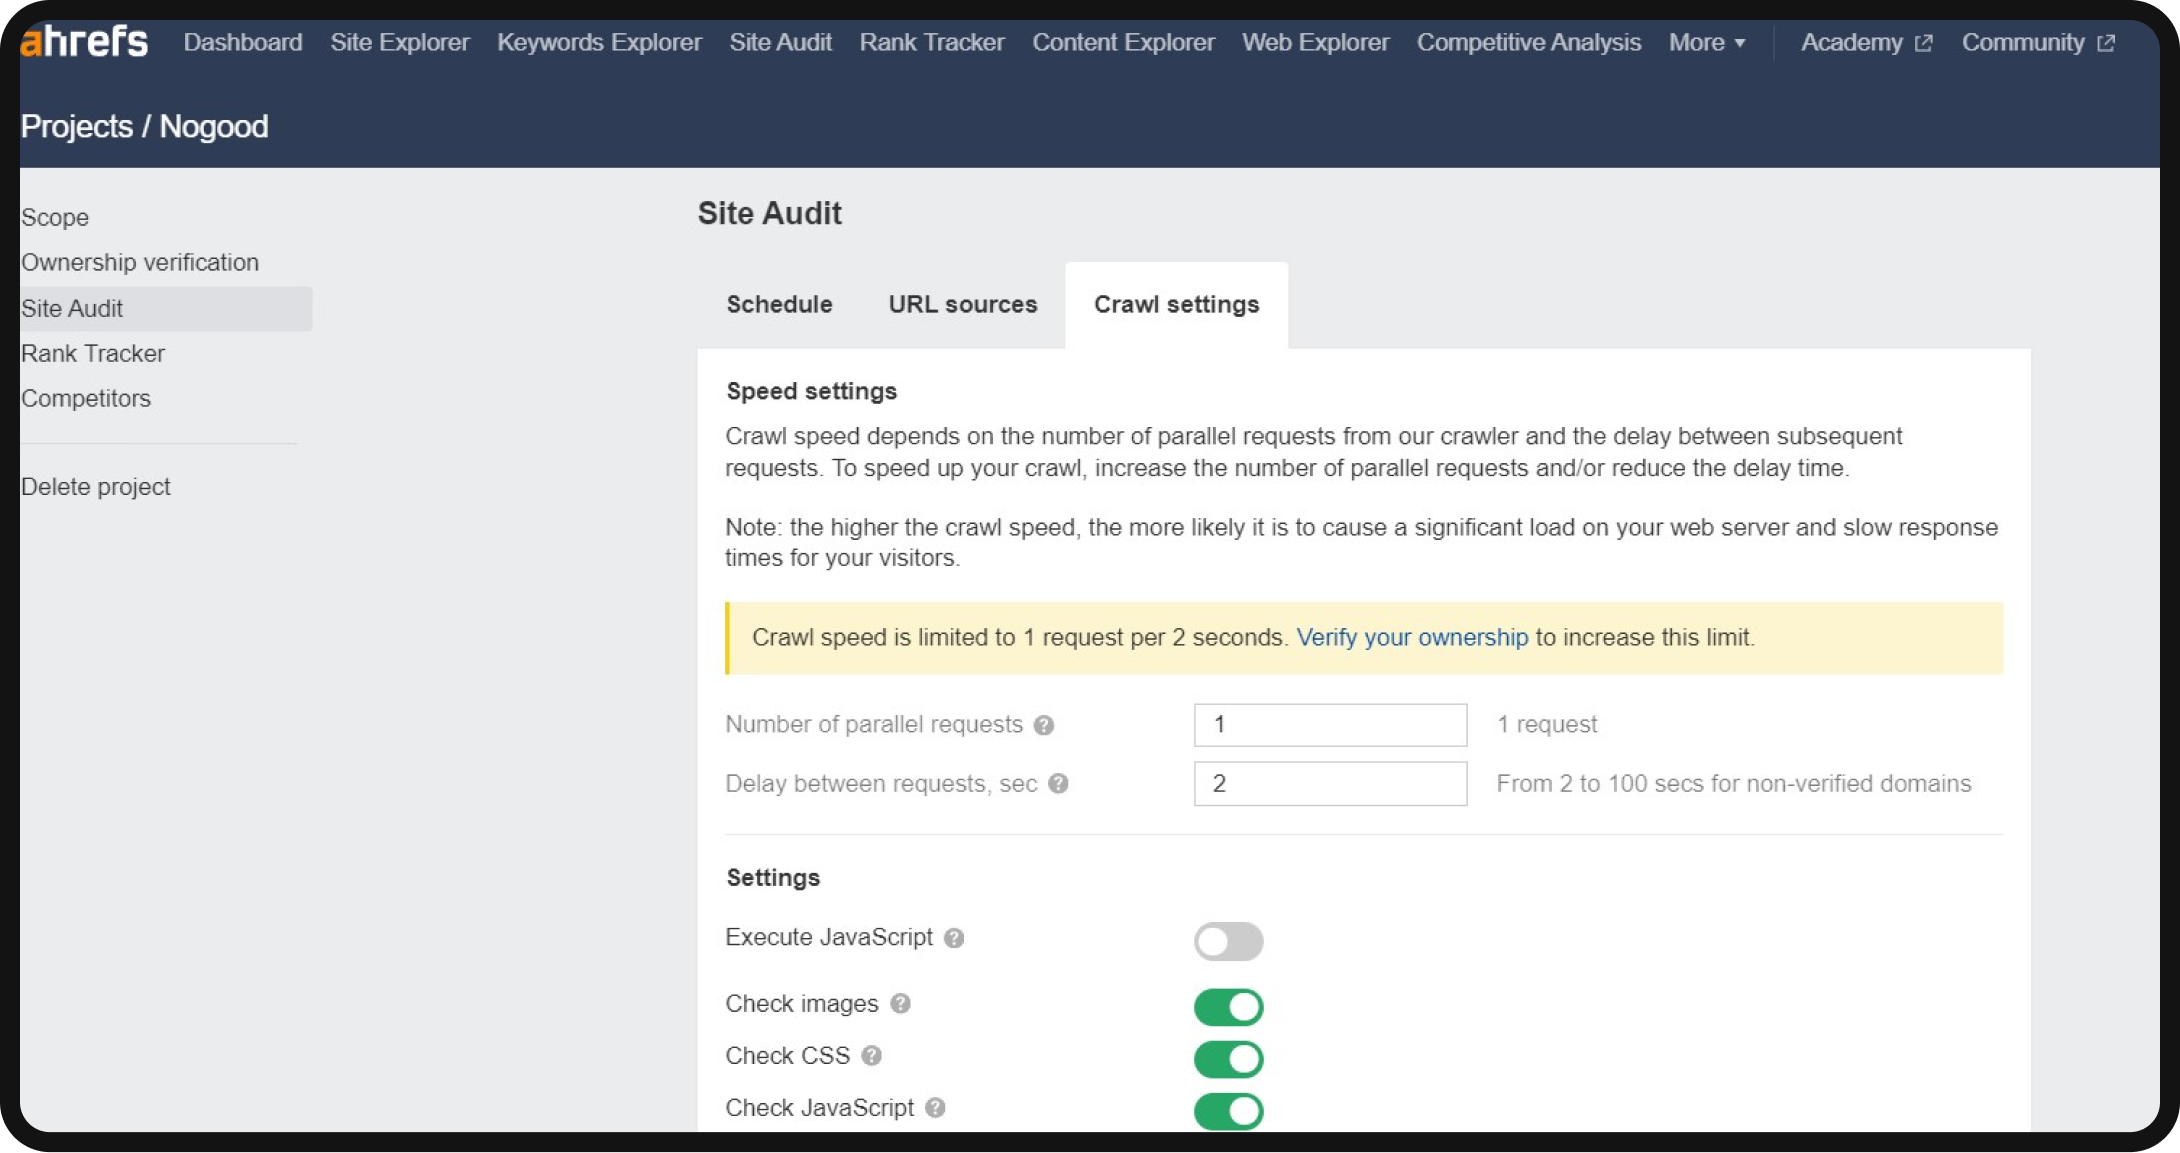 Using Ahrefs to check site audit settings for a technical SEO audit